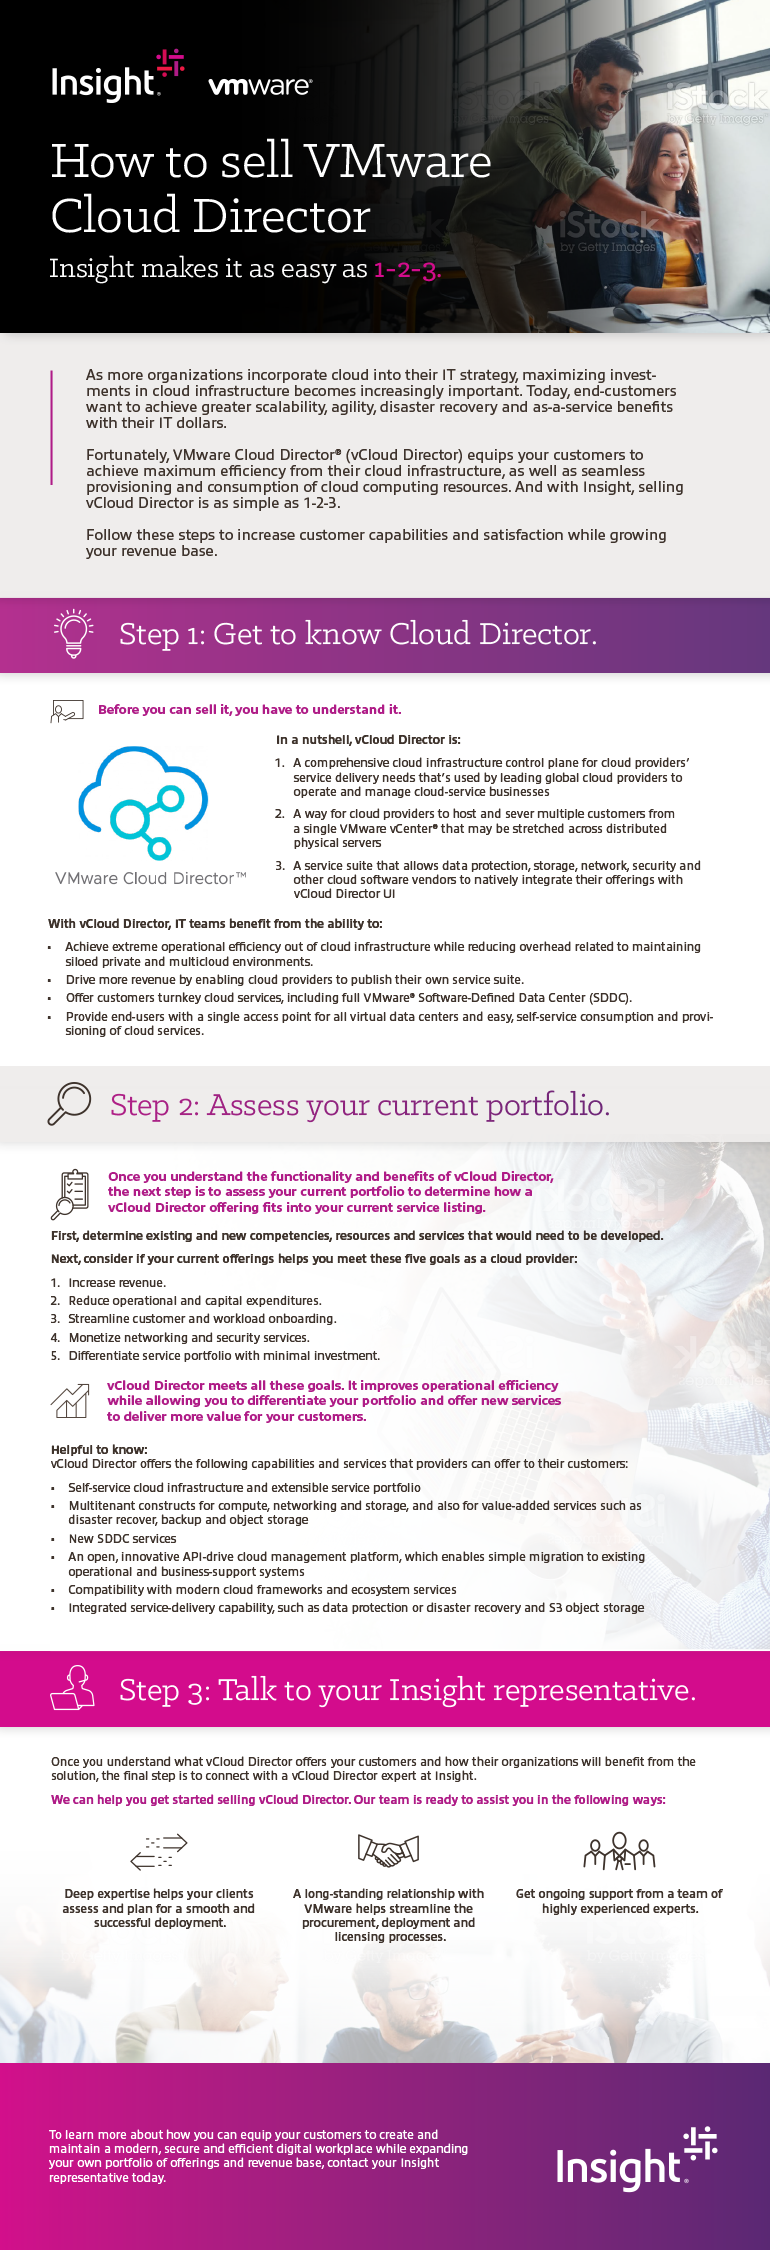 How to sell VMware Cloud Director infographic